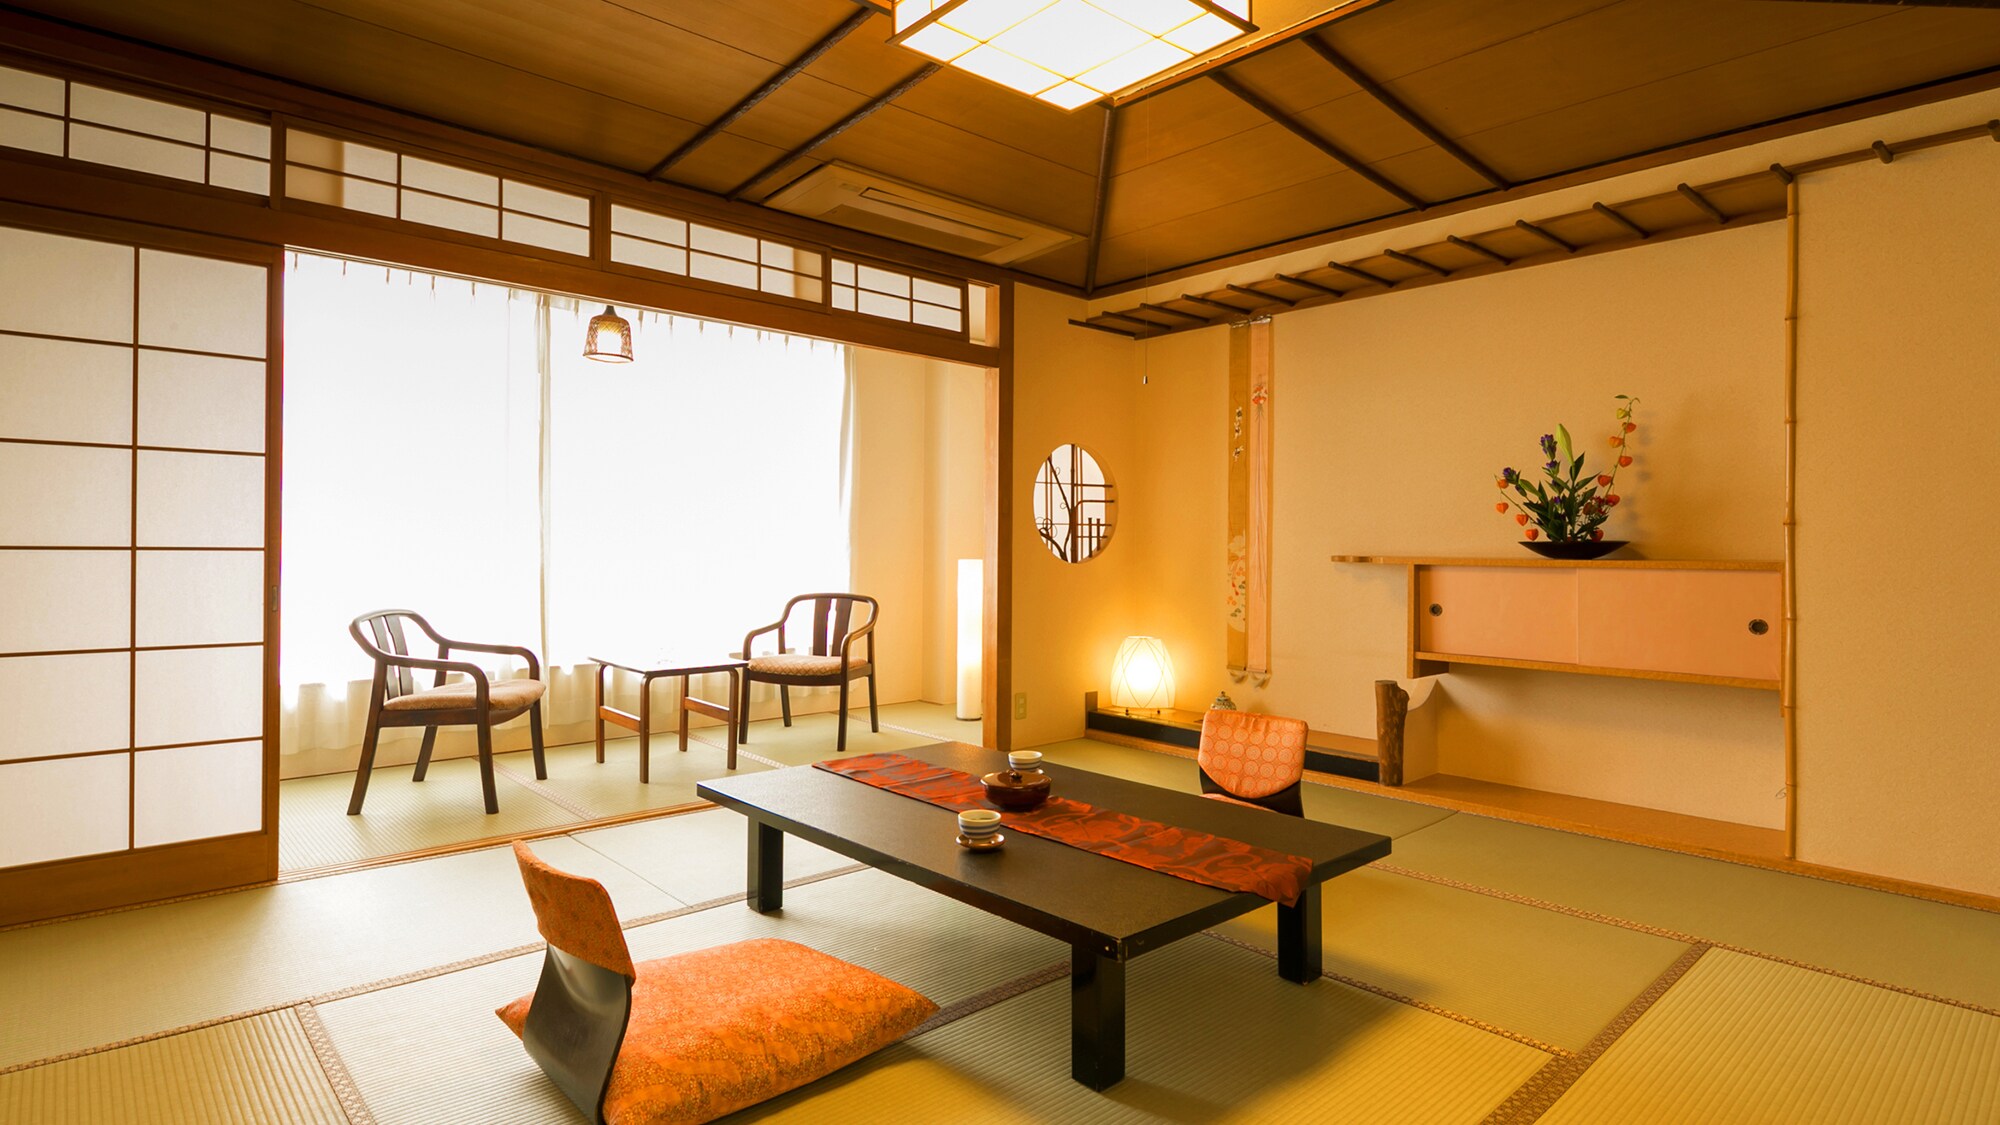 ■ Japanese-style room 10 tatami mats ■ You can relax and enjoy the view of the city from the open windows where you can feel the wind.